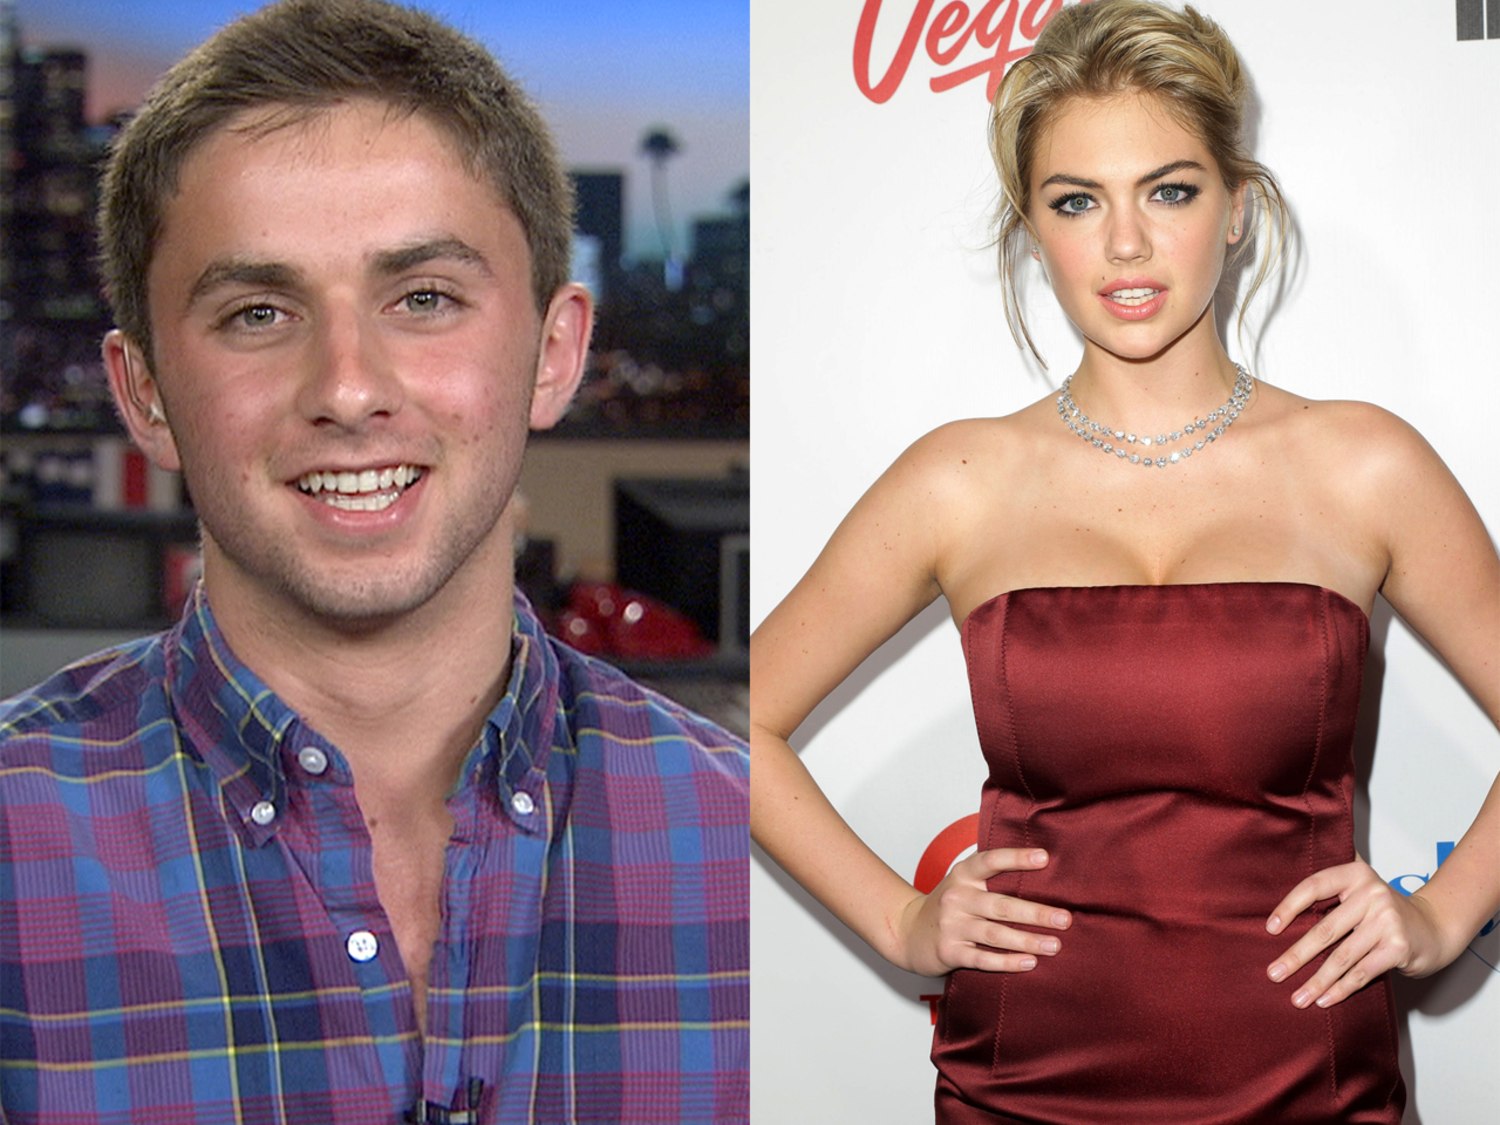 Kate Upton to teen's prom request: 'I'd love to go.